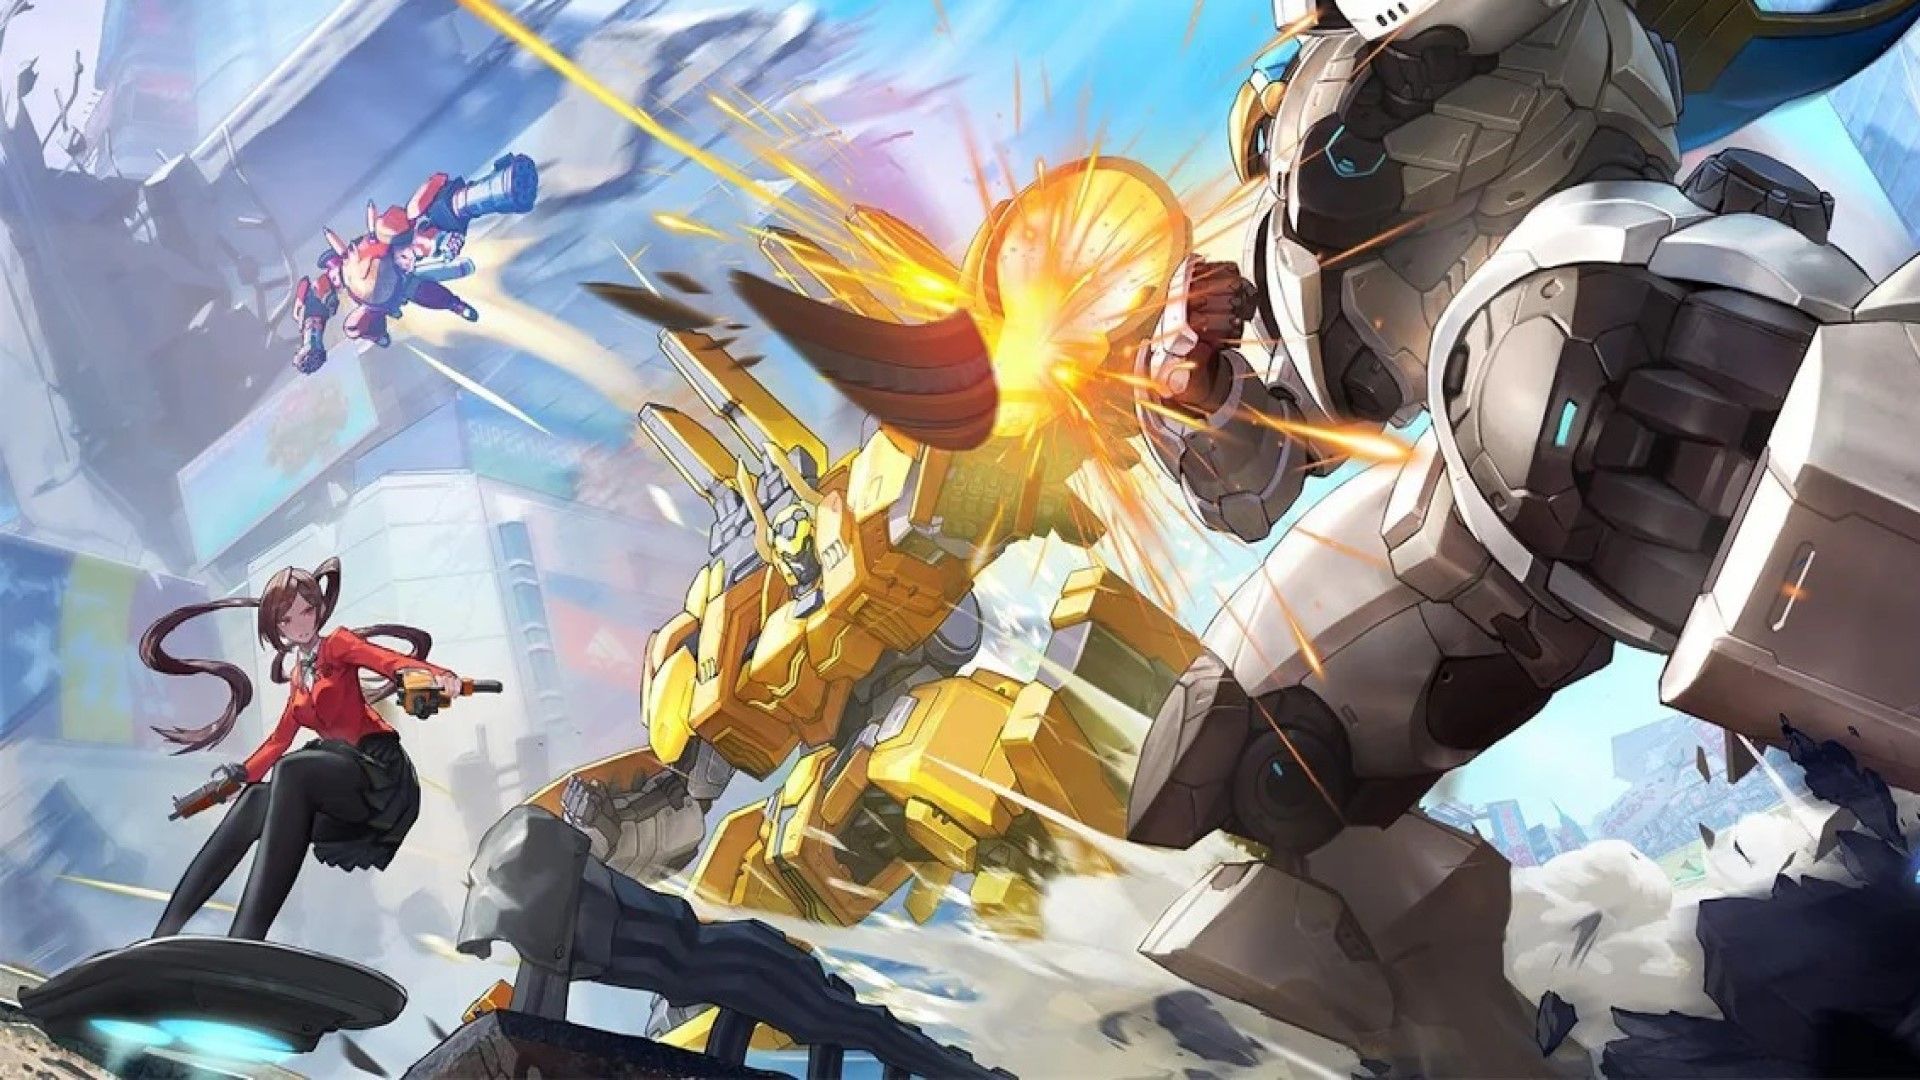 Super Mecha Champions is running a crossover event with popular anime Granbelm